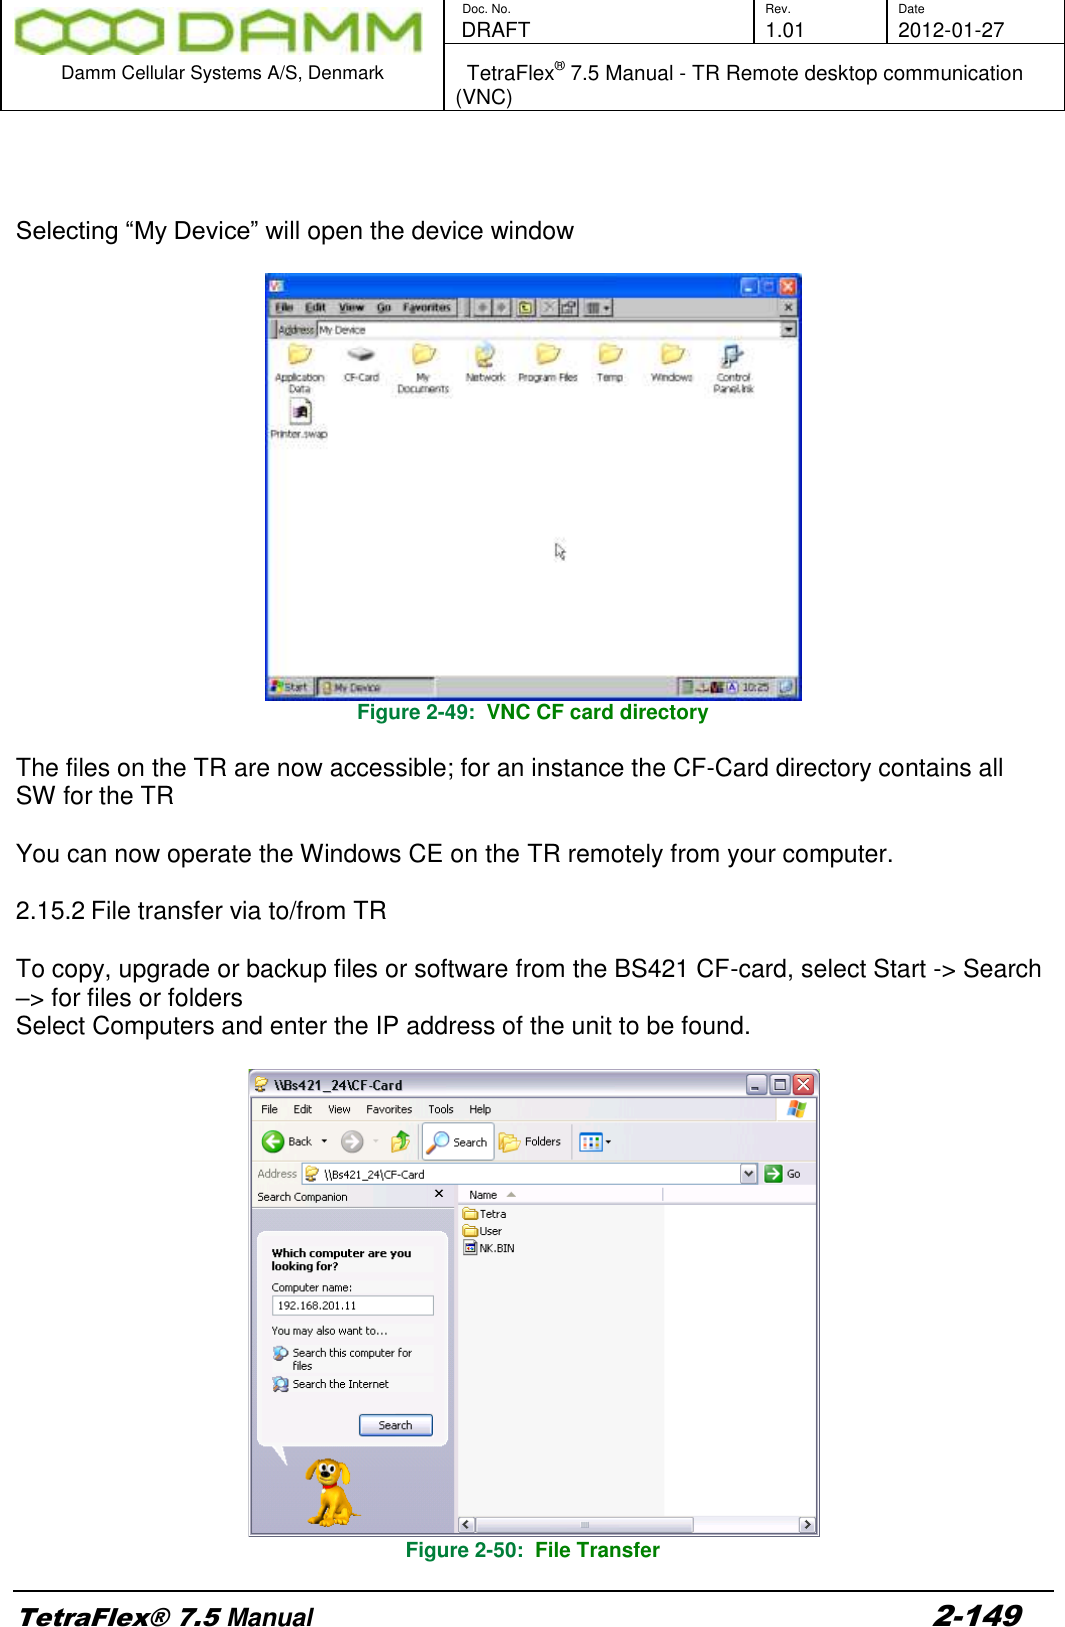        Doc. No. Rev. Date    DRAFT  1.01 2012-01-27  Damm Cellular Systems A/S, Denmark   TetraFlex® 7.5 Manual - TR Remote desktop communication (VNC)  TetraFlex® 7.5 Manual 2-149    Selecting “My Device” will open the device window   Figure 2-49:  VNC CF card directory  The files on the TR are now accessible; for an instance the CF-Card directory contains all SW for the TR  You can now operate the Windows CE on the TR remotely from your computer.  2.15.2 File transfer via to/from TR  To copy, upgrade or backup files or software from the BS421 CF-card, select Start -&gt; Search –&gt; for files or folders  Select Computers and enter the IP address of the unit to be found.   Figure 2-50:  File Transfer 